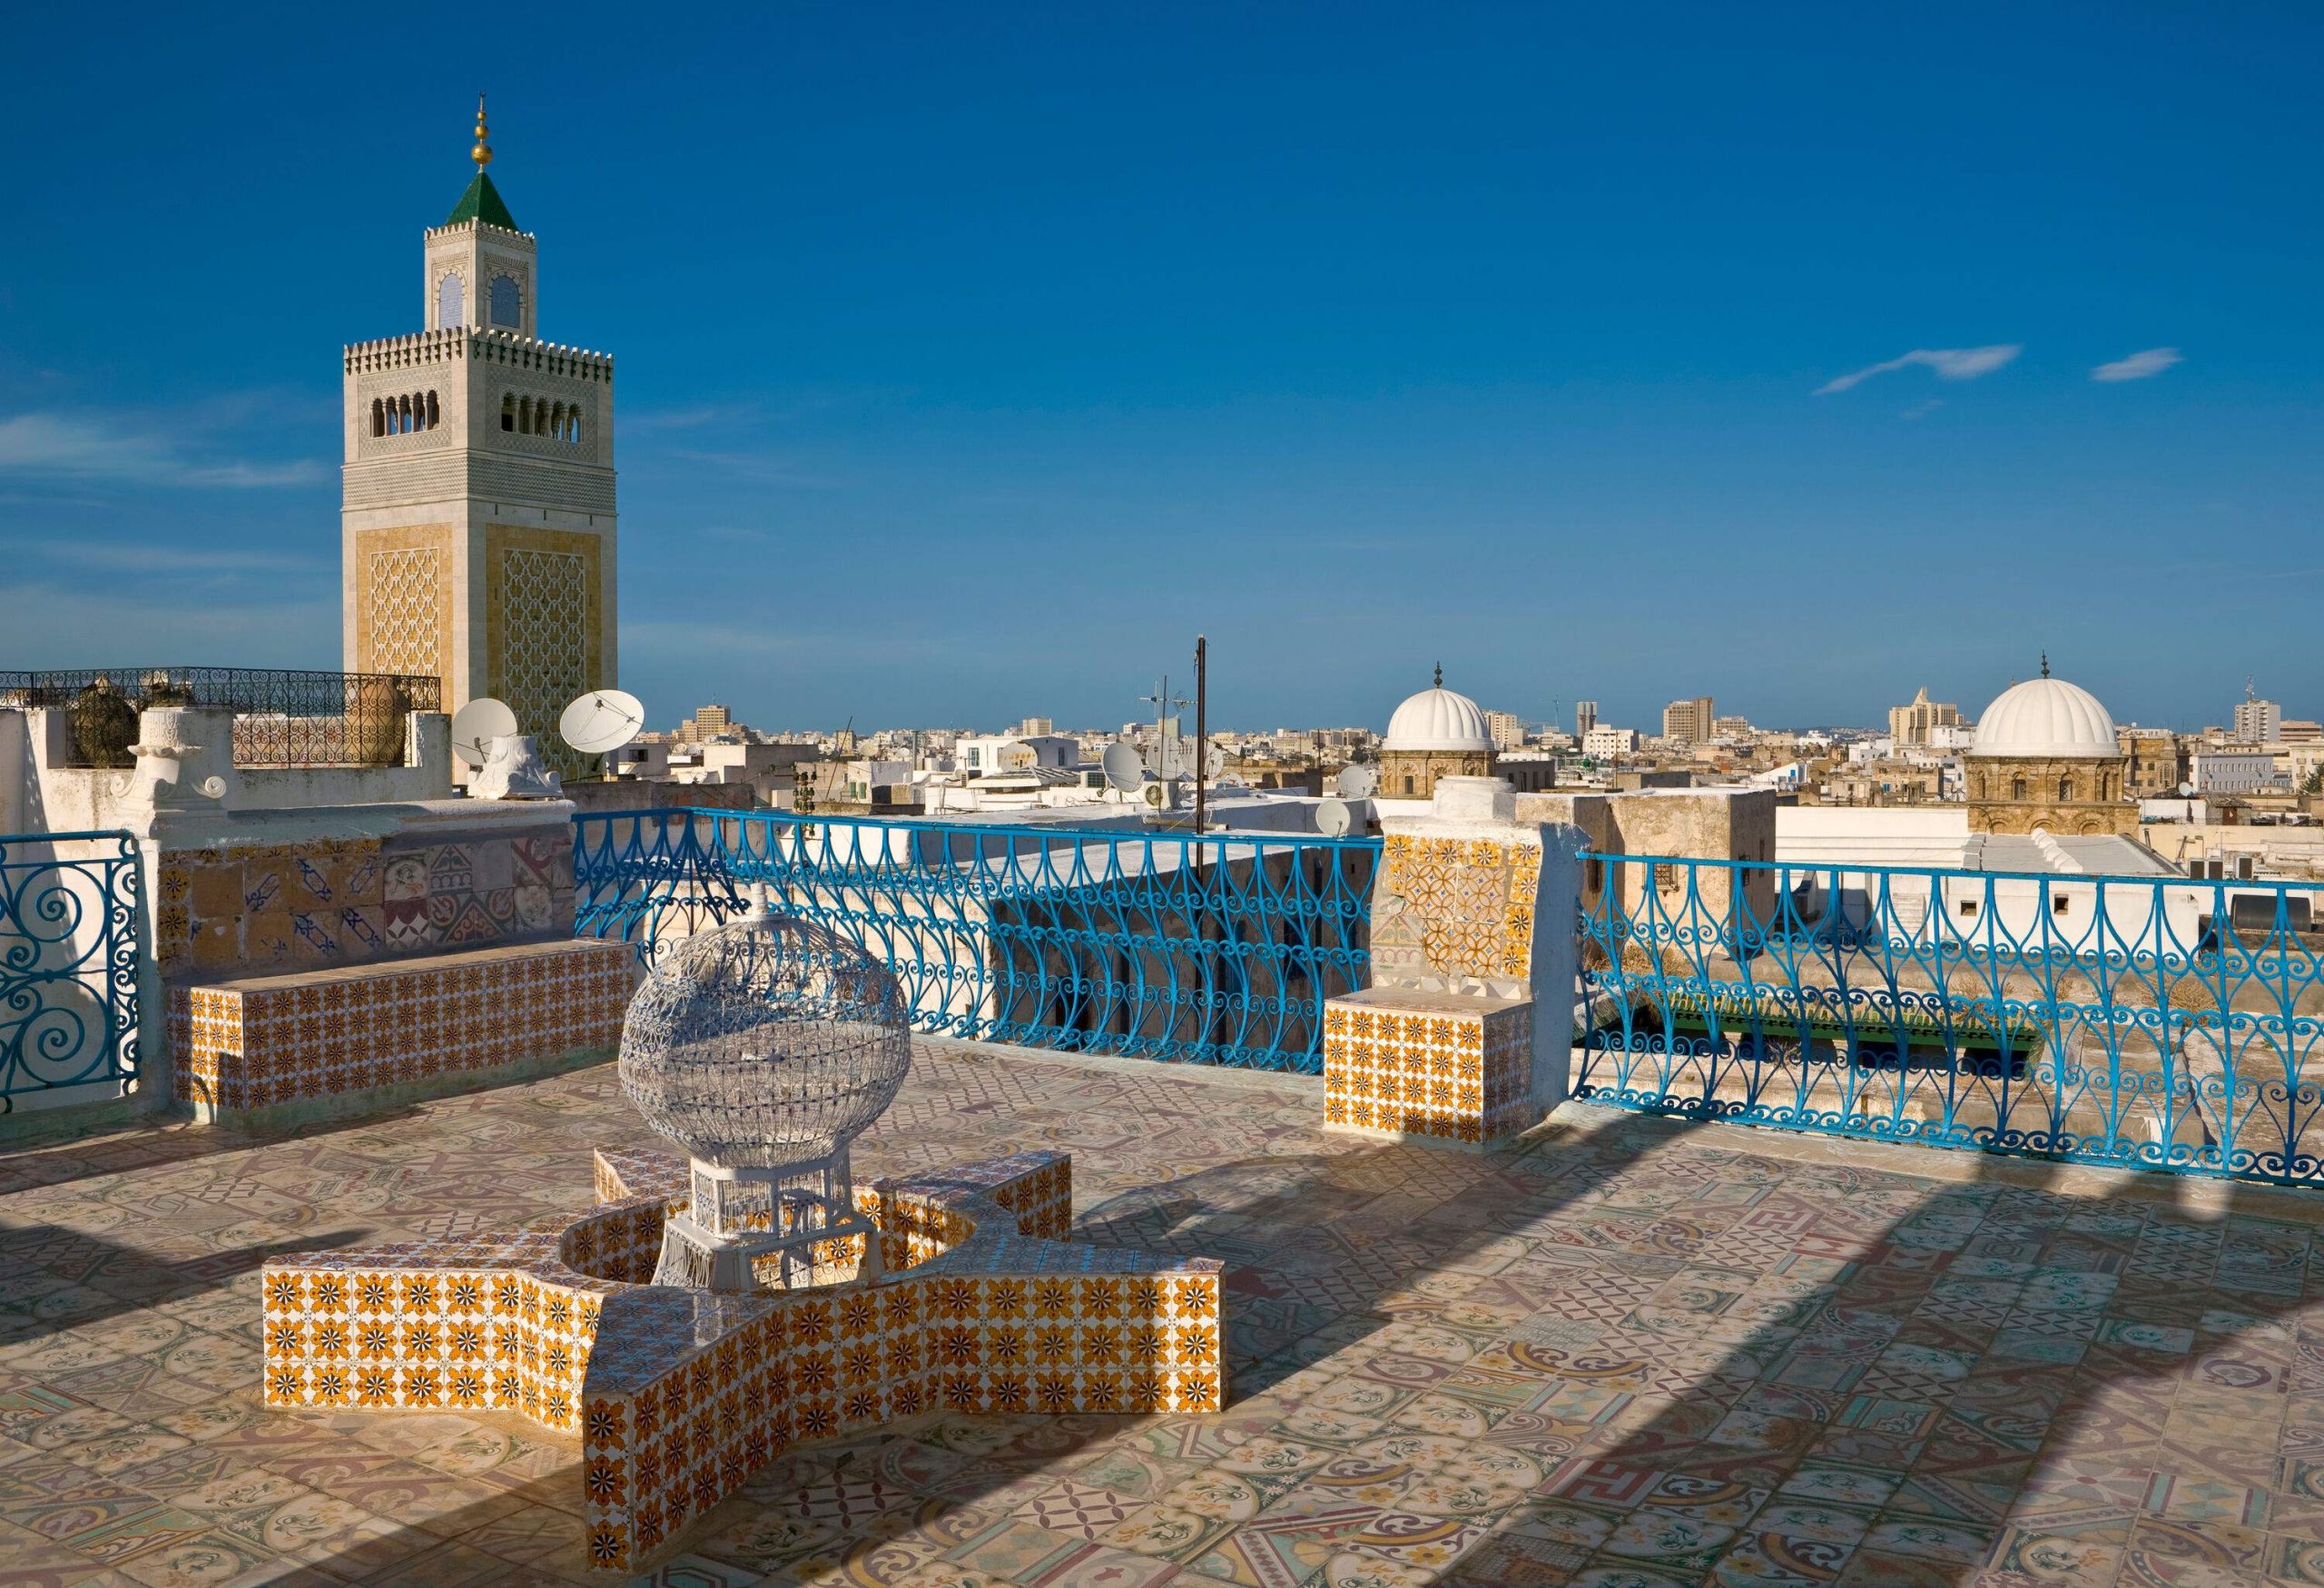 A terrace with intricately ornamented tiles provides a scenic view of an old town skyline, with a mosque minaret standing on the left side.